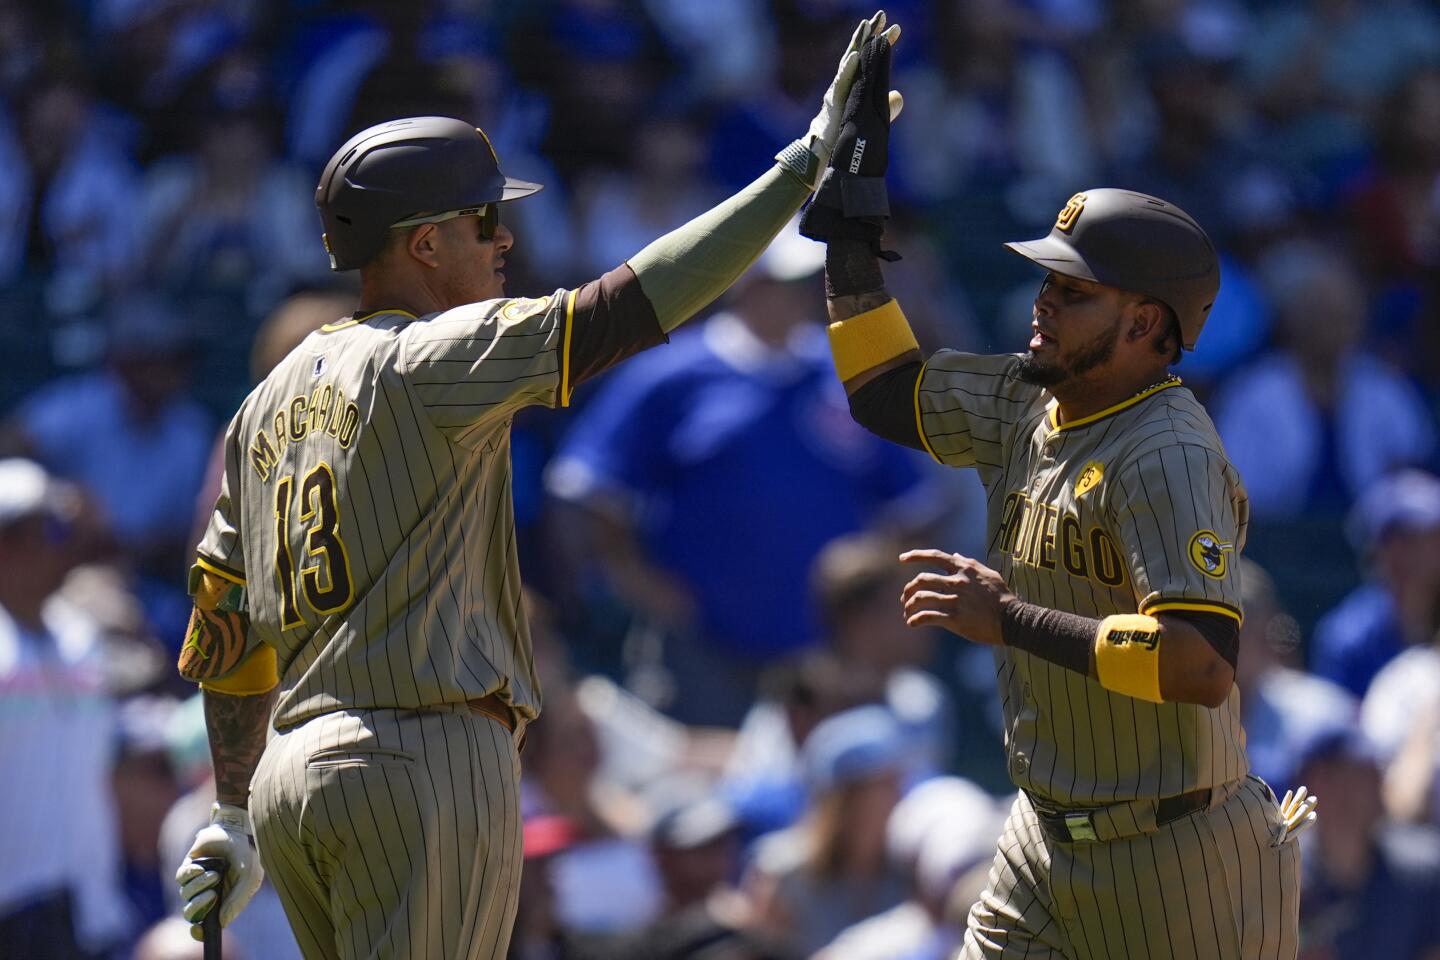 San Diego Padres (20-20, 2nd in NL West)The Padres are coming off a 4-2 road trip, their second such trip this season, but they are still 6½ games behind the Dodgers in the division. The Padres are 7-12 so far at Petco Park, but they are 9-8 so far against teams with winning records: Dodgers (3-2, Cubs (4-2), Brewers (2-1) and Phillies (0-3).